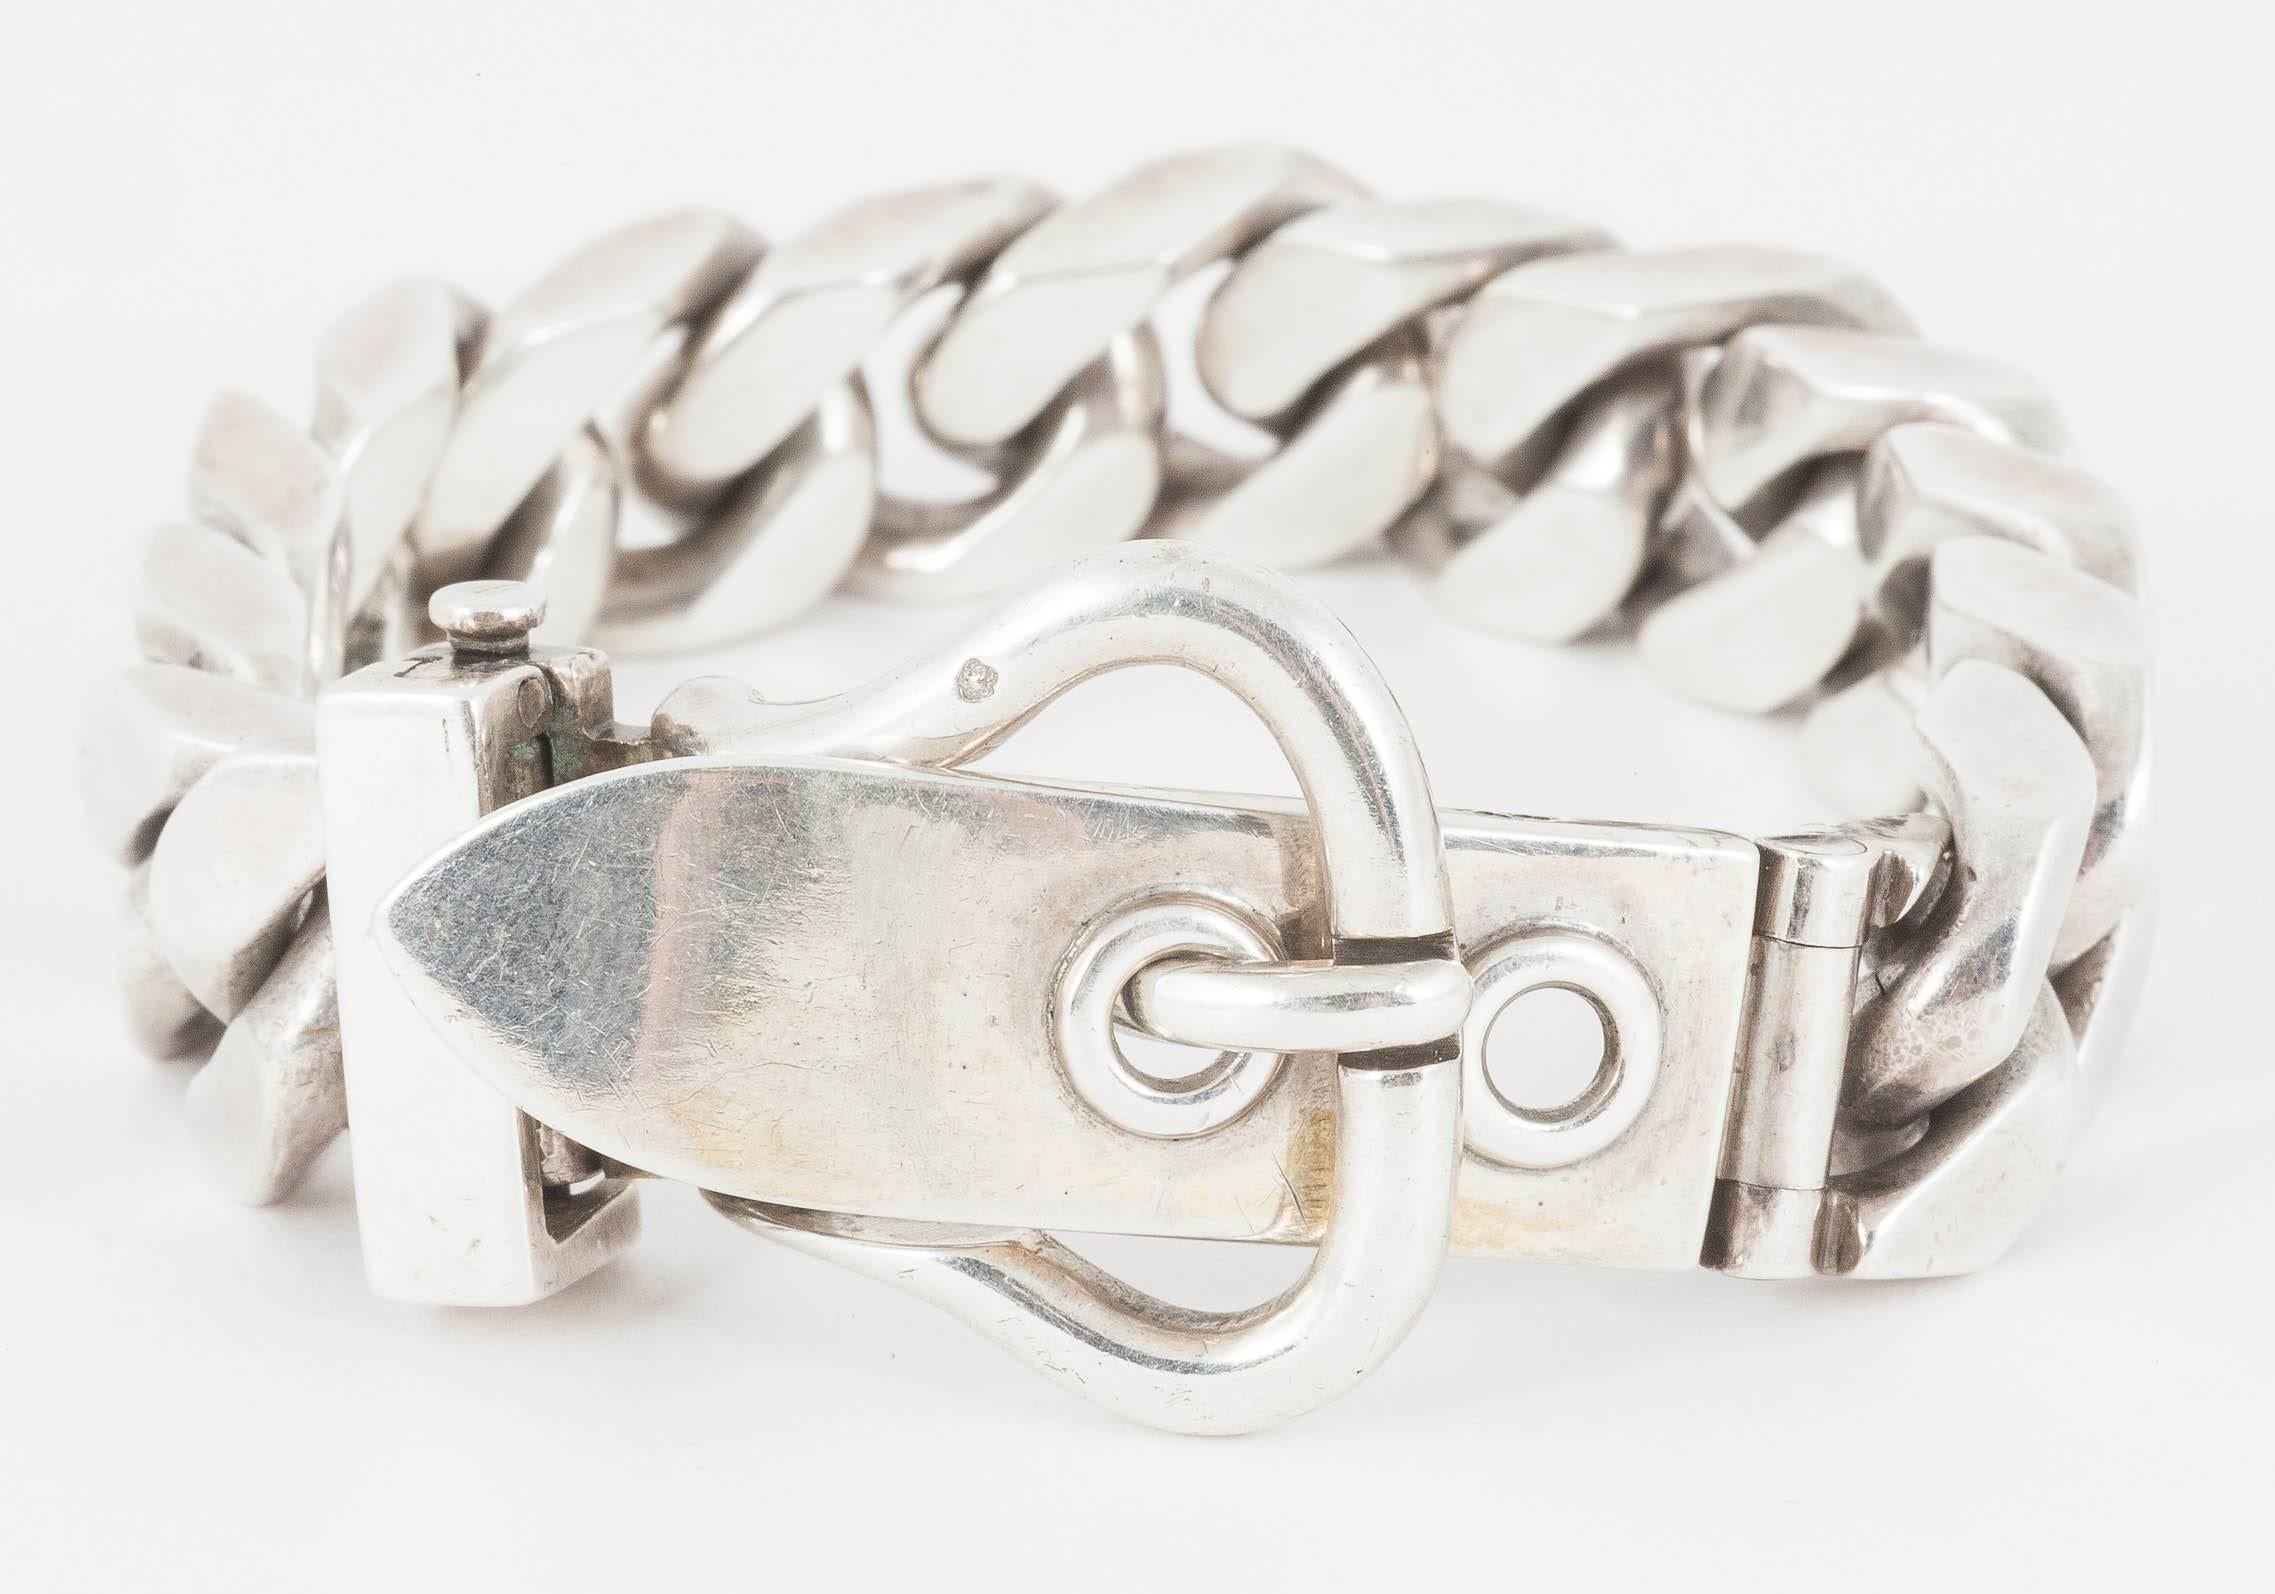 A heavy quality flat curb linked bracelet with a buckle clasp,signed Hermes of paris,weight 117 grammes,length 225mm,width of curb 15mm, c,1950-60 